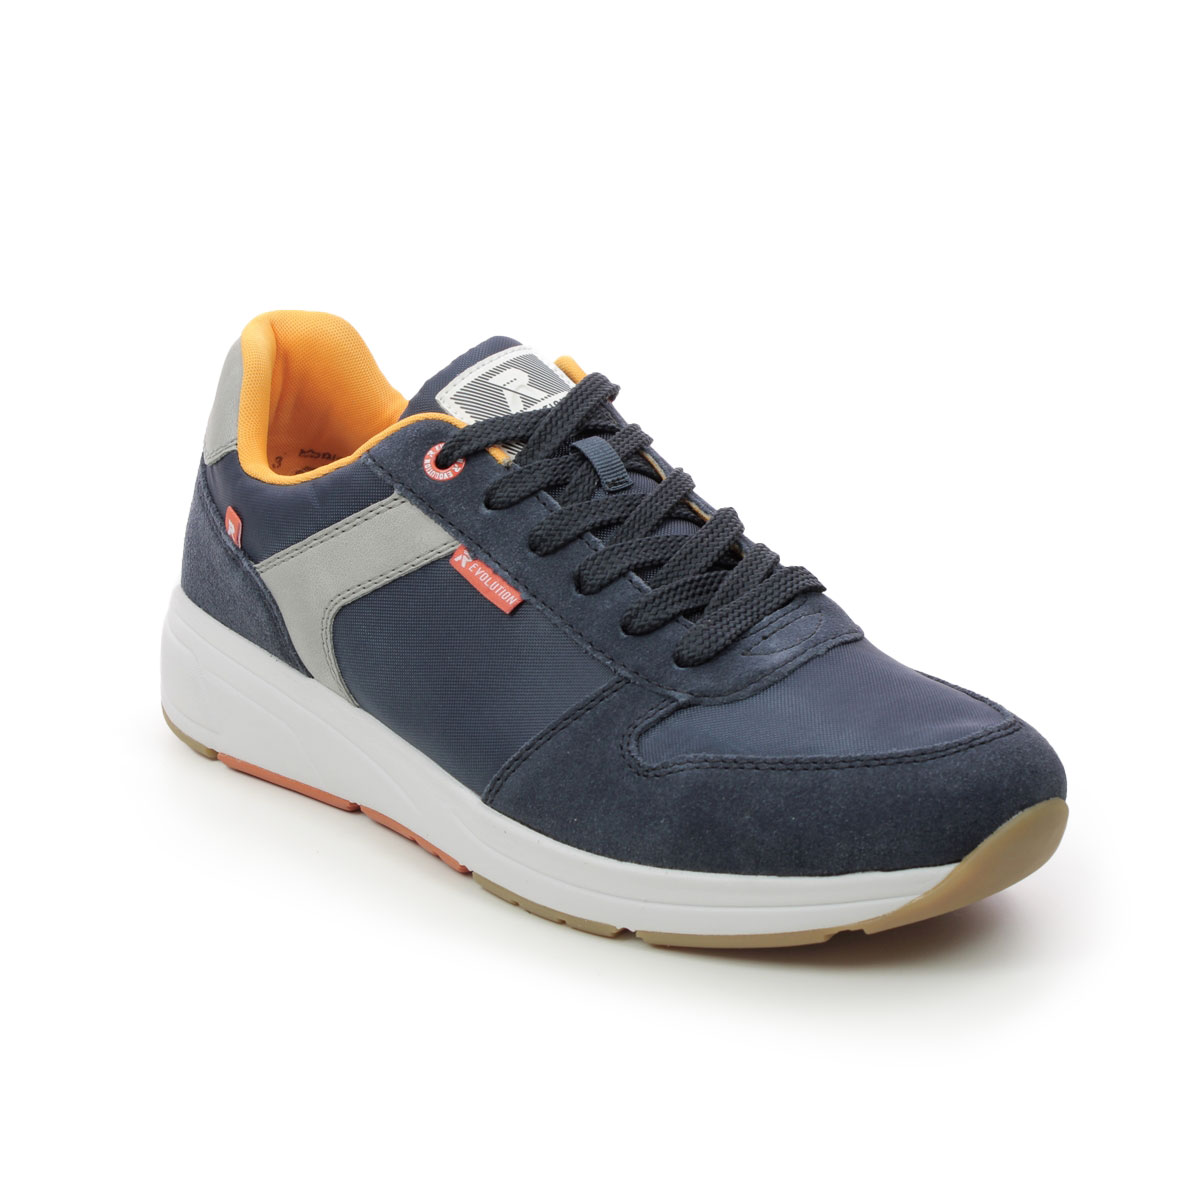 Rieker Archy Evo Navy Mens Trainers 07002-14 In Size 41 In Plain Navy